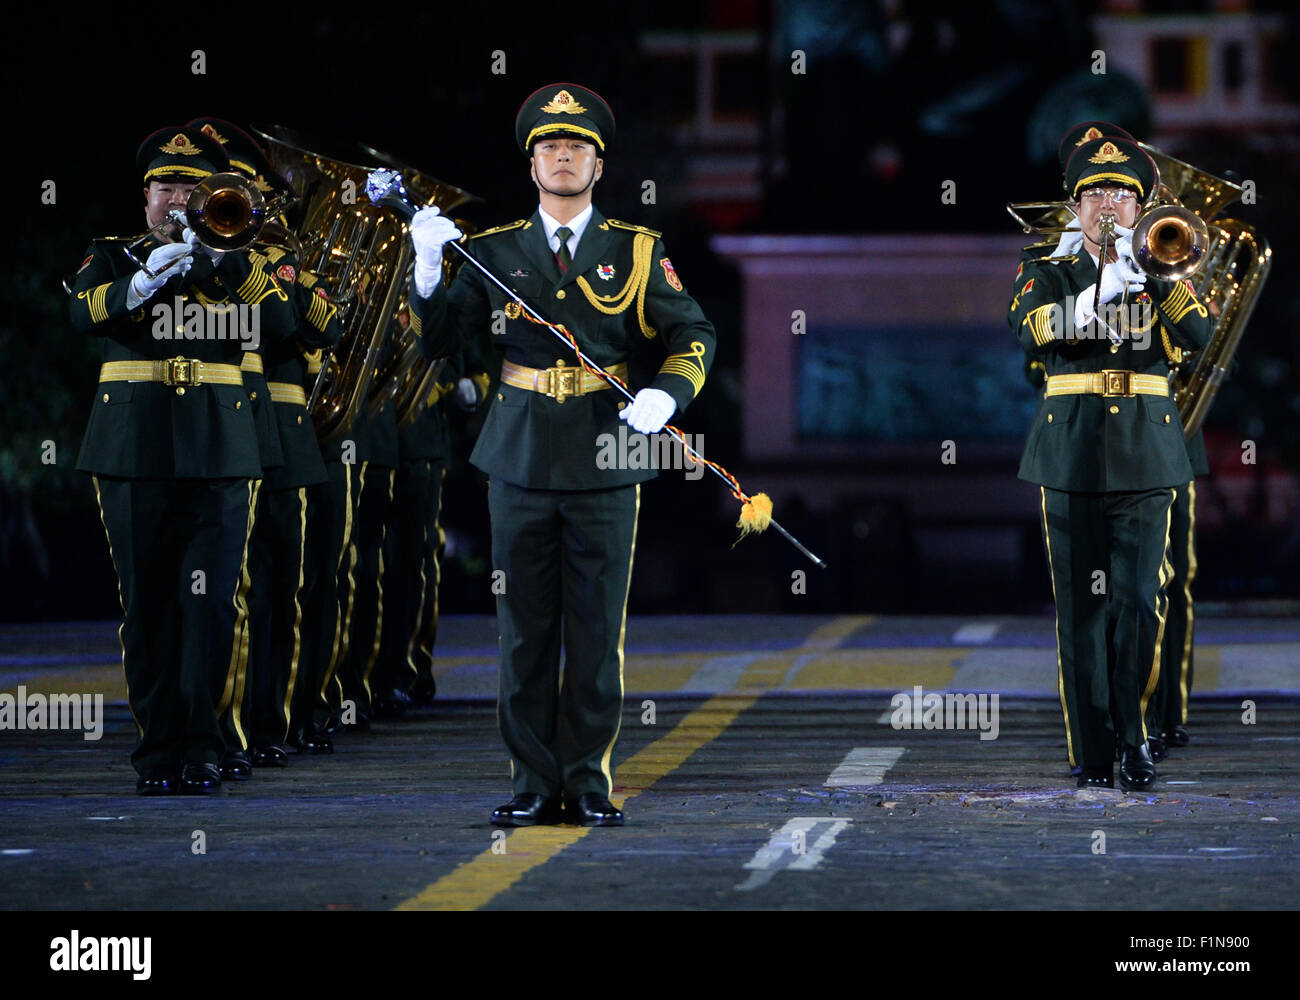 Moscow, Russia. 4th Sep, 2015. China's Military band of the People's Liberation Army perform during general rehearsal of Kremlin Military Tattoo 'Spasskaya Bashnya' on Red square in Moscow, Russia, Sep. 4, 2015. © Pavel Bednyakov/Xinhua/Alamy Live News Stock Photo